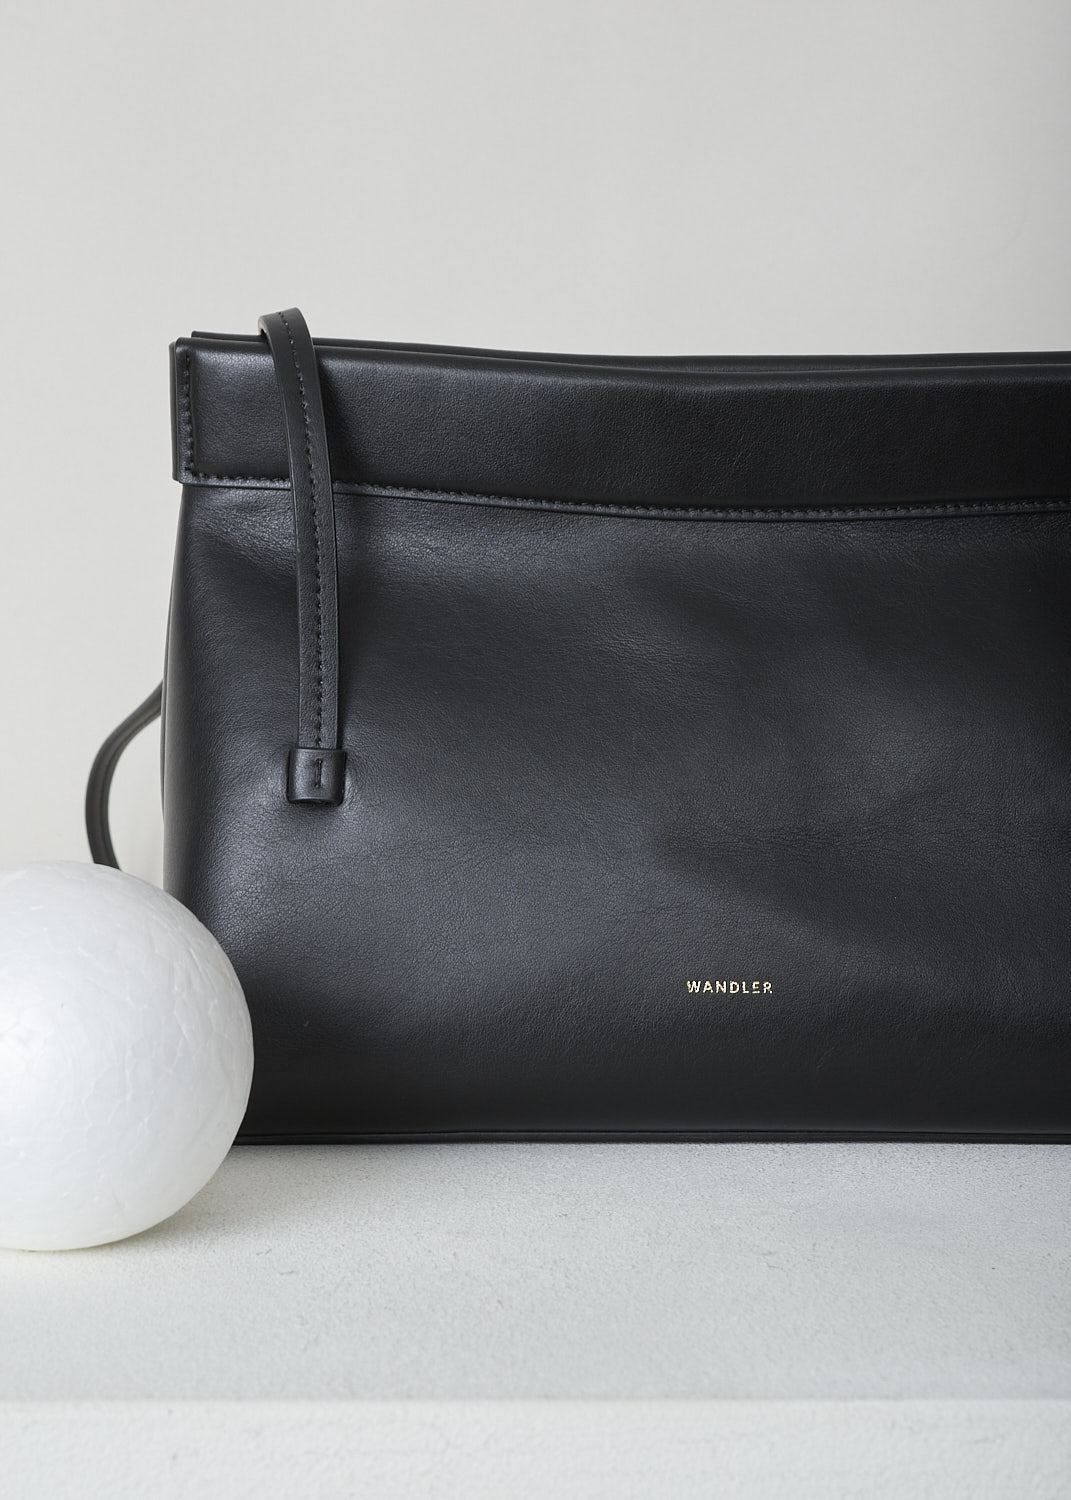 WANDLER, JOANNA MINI BAG IN BLACK, JOANNA_BAG_MINI_BLACK_22108100391, Black, Detail, This black Joanna mini hand bag has slim top handles. The magnetic strip closure opens up to the single spacious compartment. On the front, the brand's lettering can be found in gold.  

